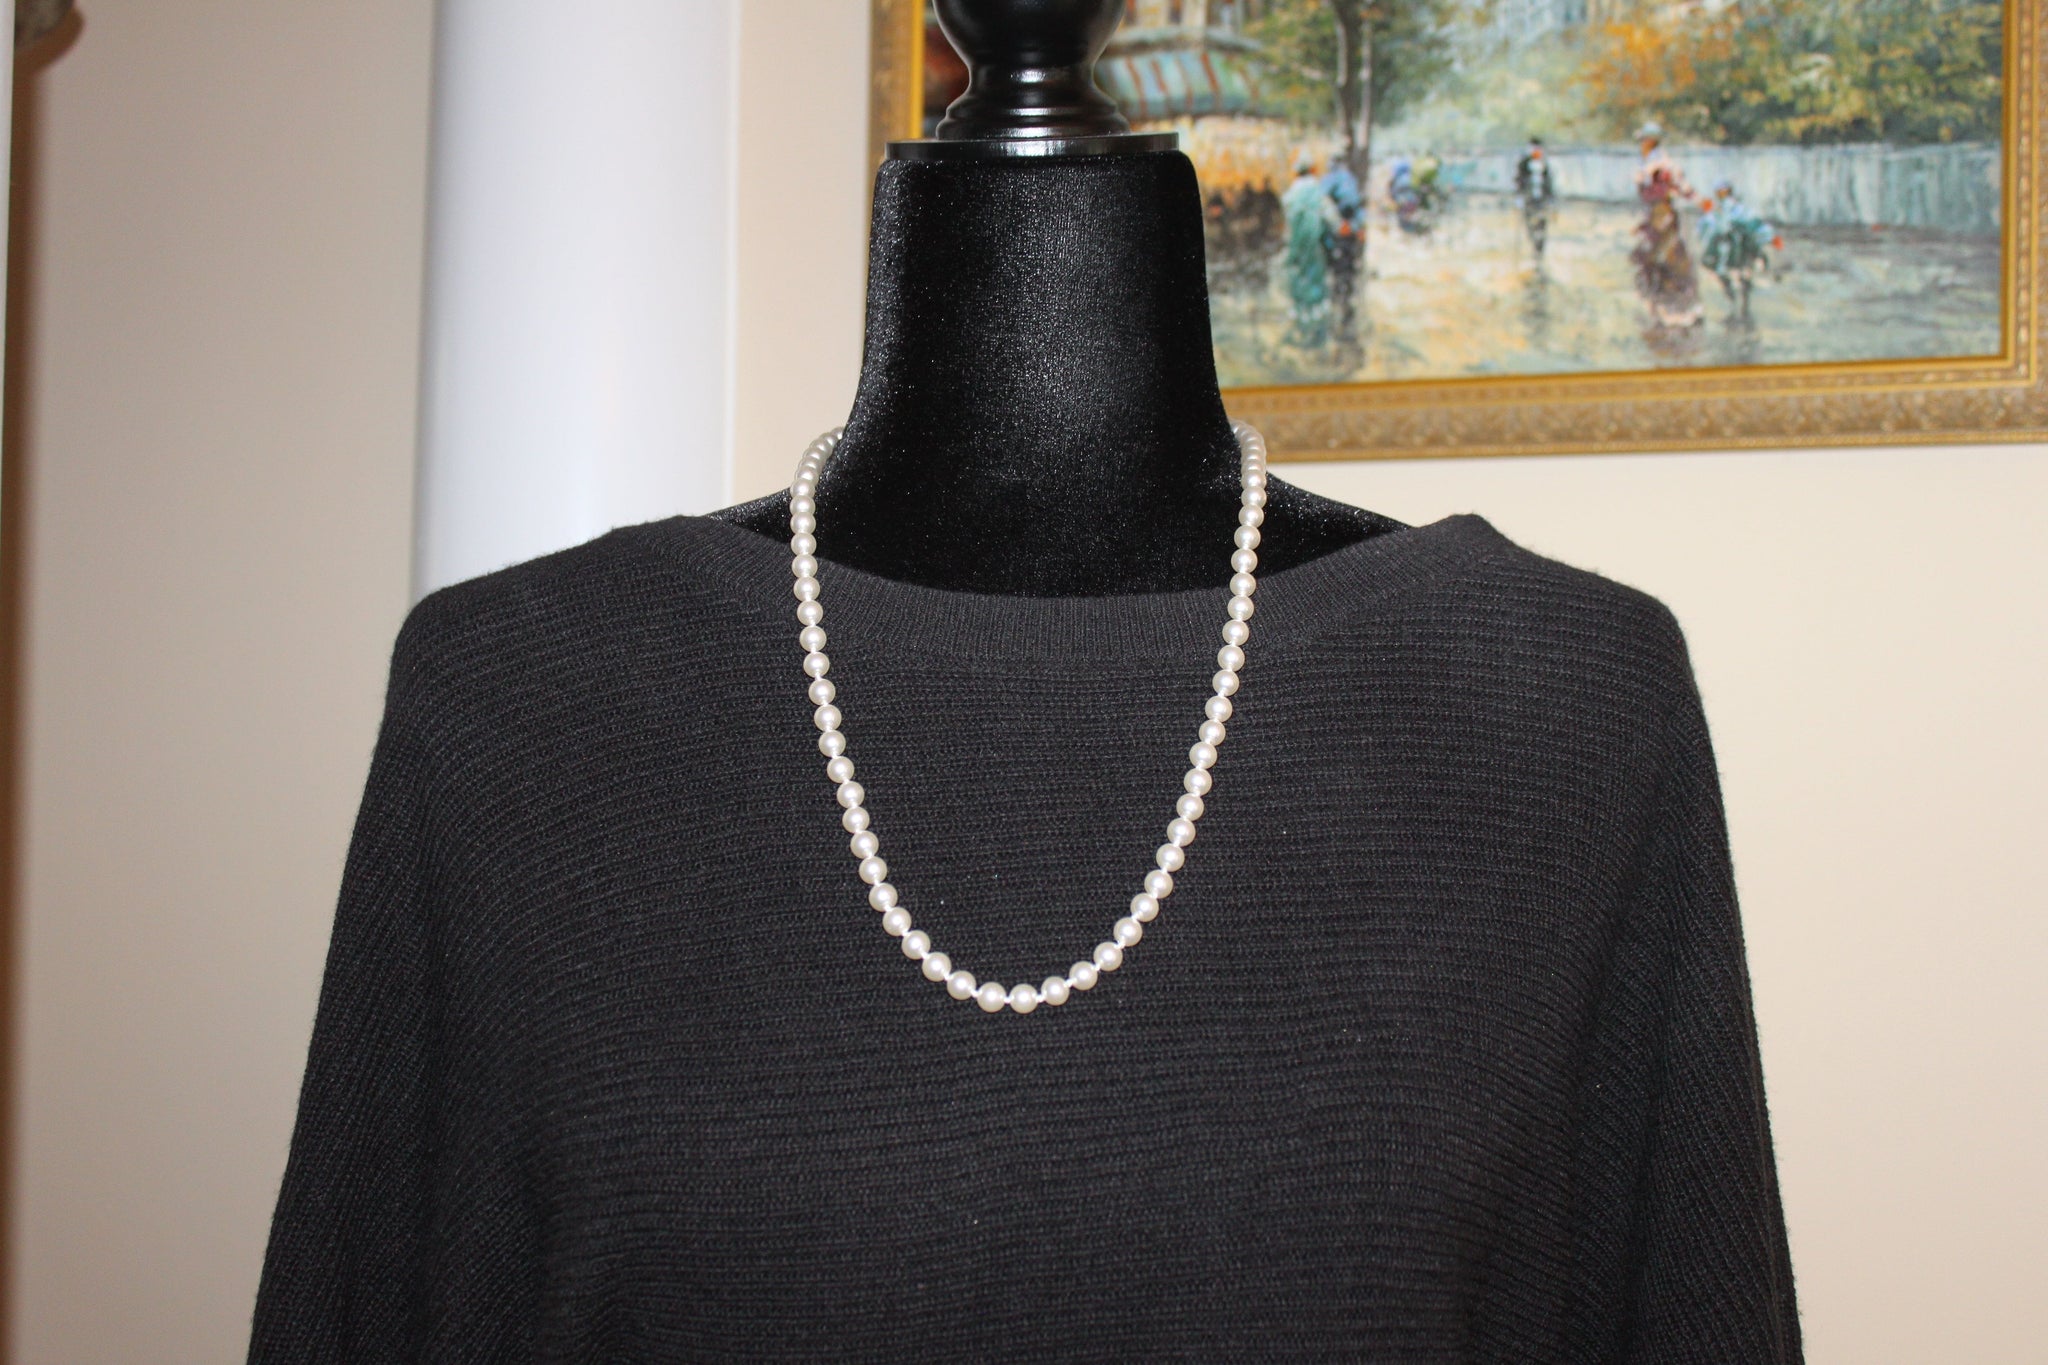 Get Latest Vintage Pearl Necklace in Online - J's Classic Finds